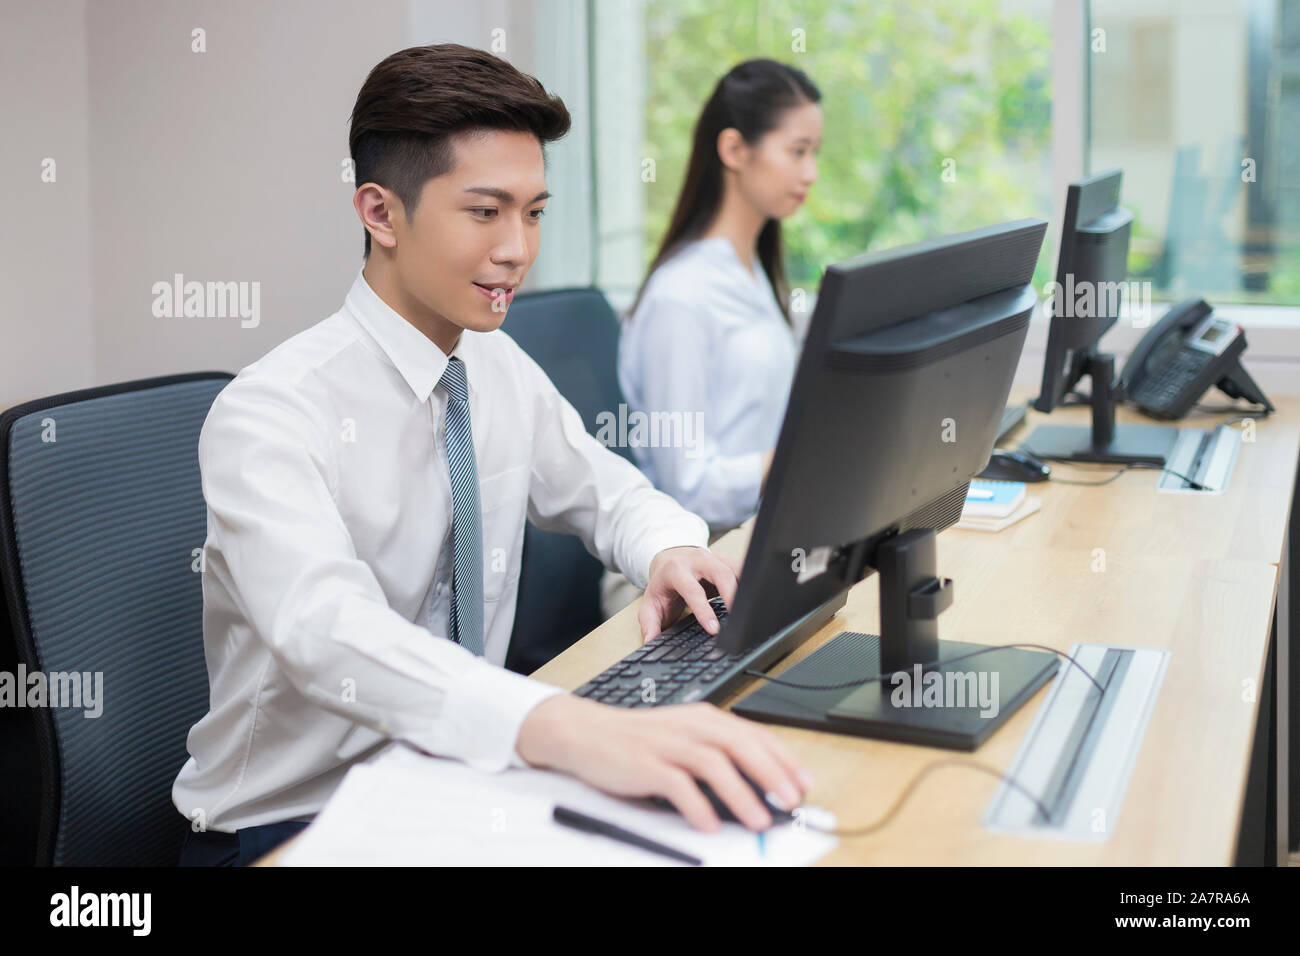 Side view waist up shot of a young businessman with black hair wearing shirt and a tie using a computer at a desk in an office Stock Photo